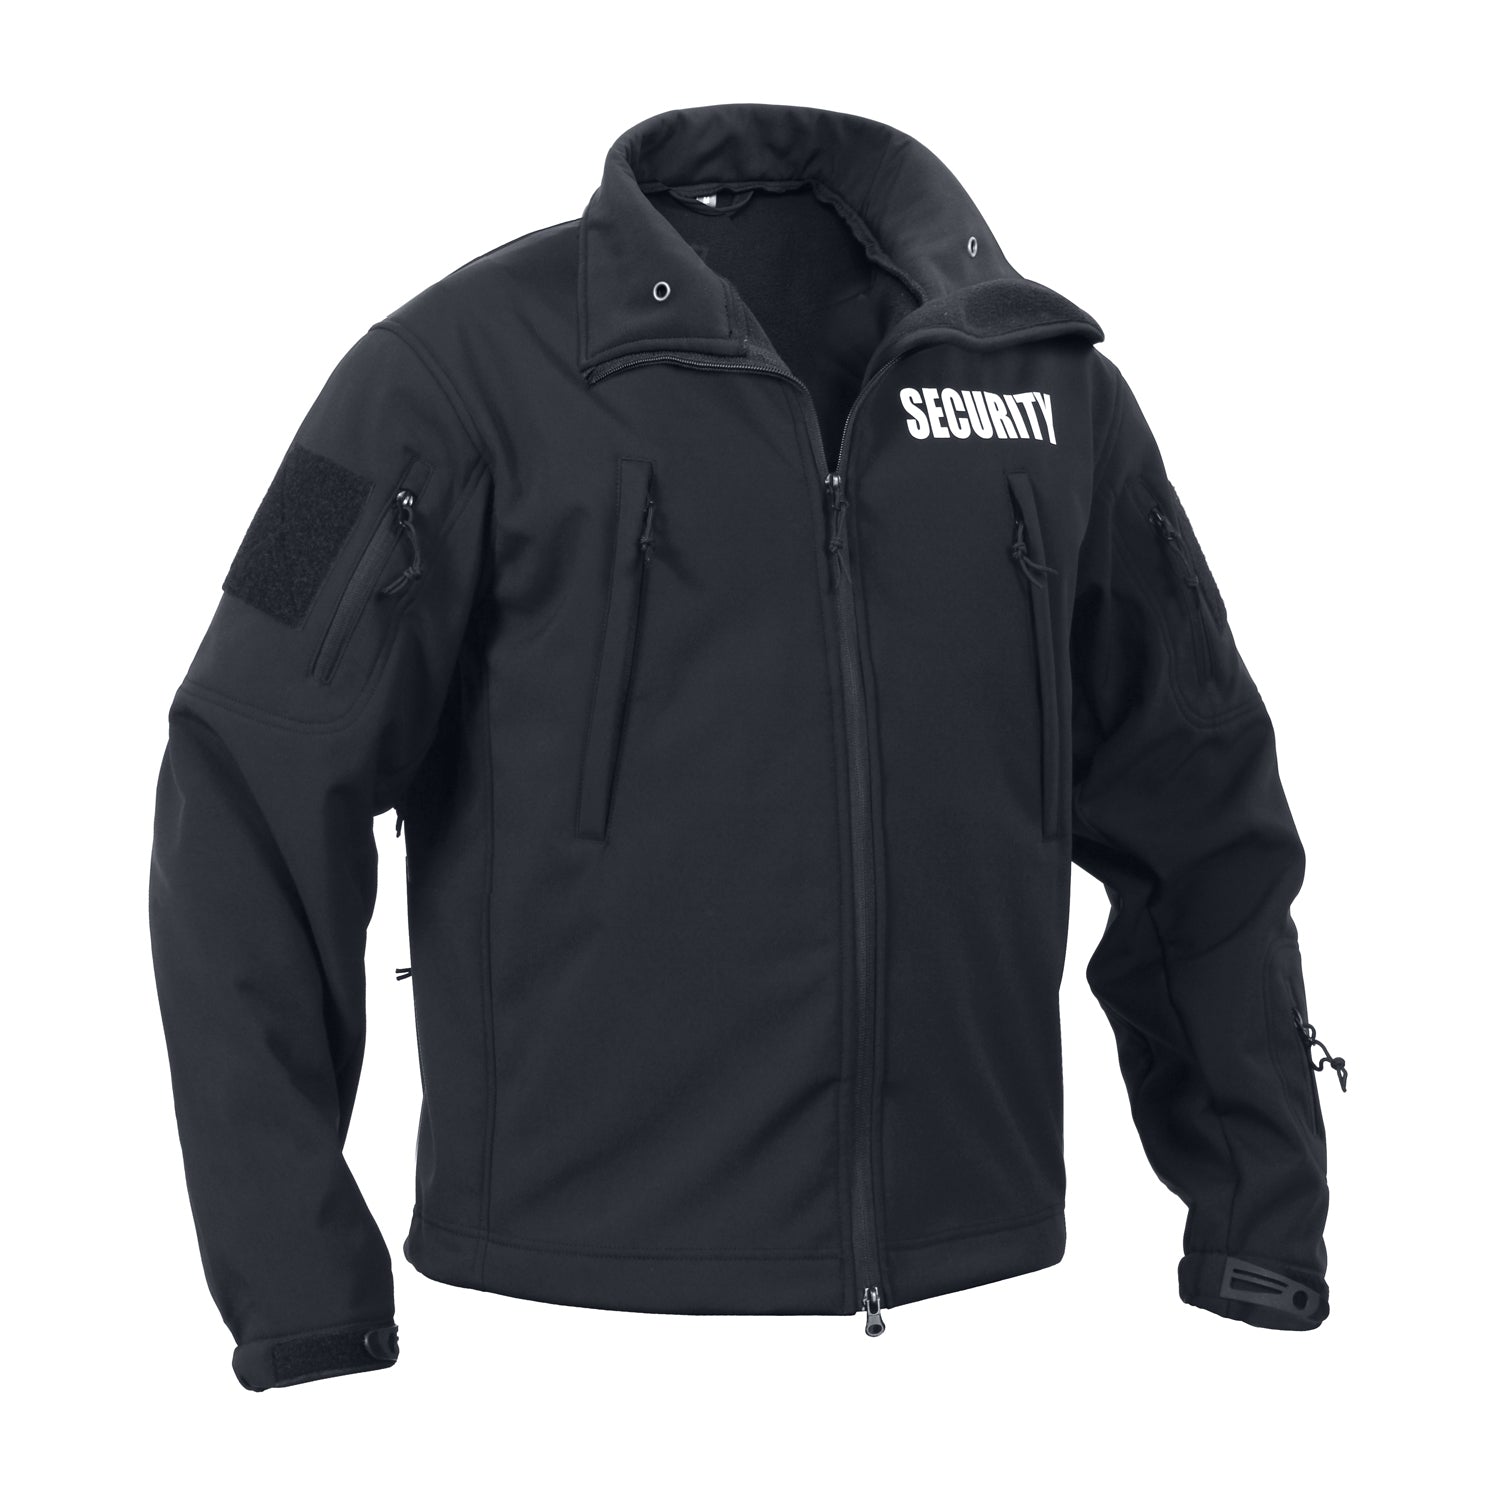 Rothco Spec Ops Soft Shell Jacket Black "Security" (TACJAC)